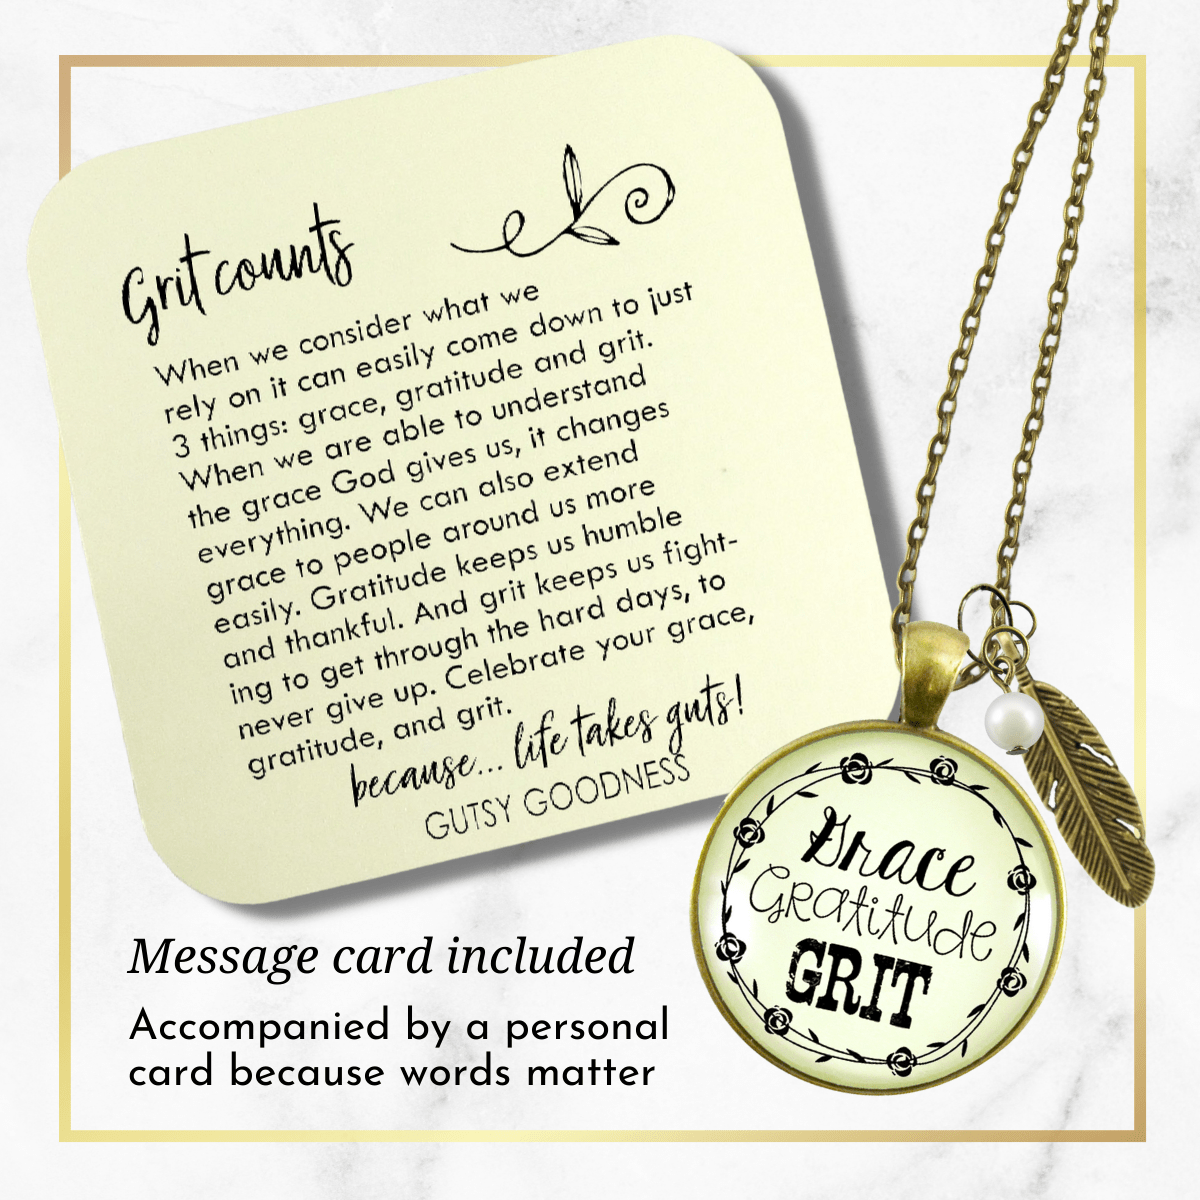 Gutsy Goodness Grace Gratitude Grit Necklace Southern Country Feather Charm - Gutsy Goodness Handmade Jewelry;Grace Gratitude Grit Necklace Southern Country Feather Charm - Gutsy Goodness Handmade Jewelry Gifts